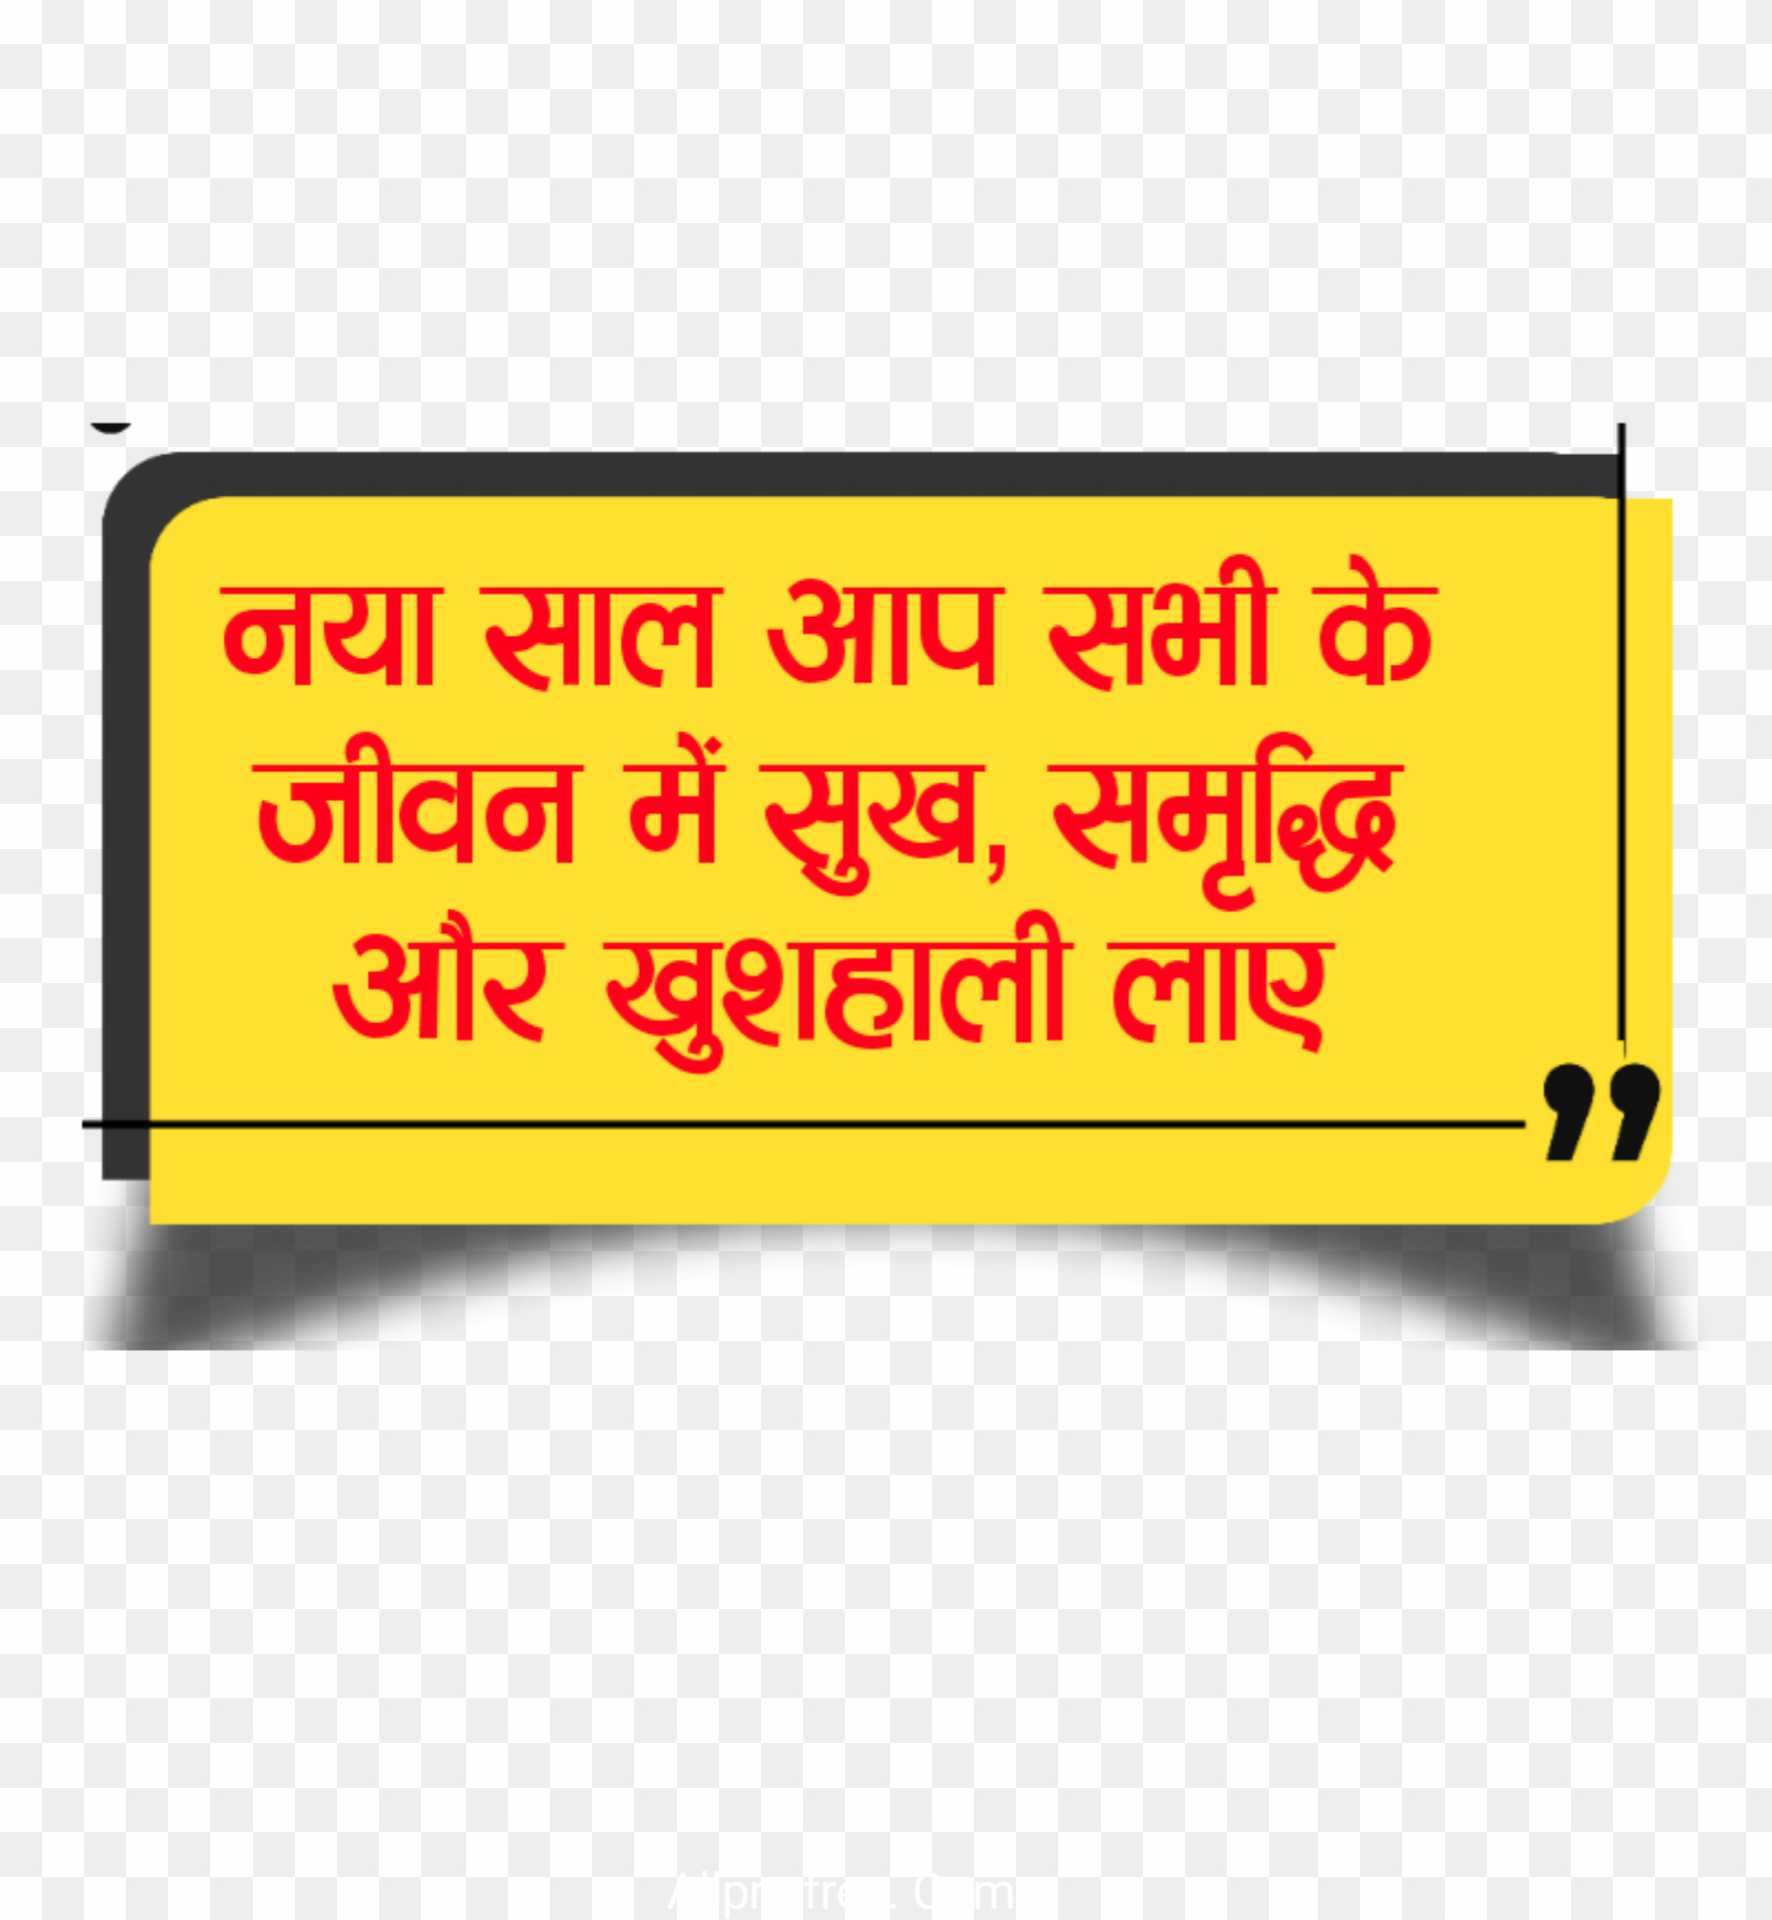 Happy new year quotes in Hindi text PNG images download